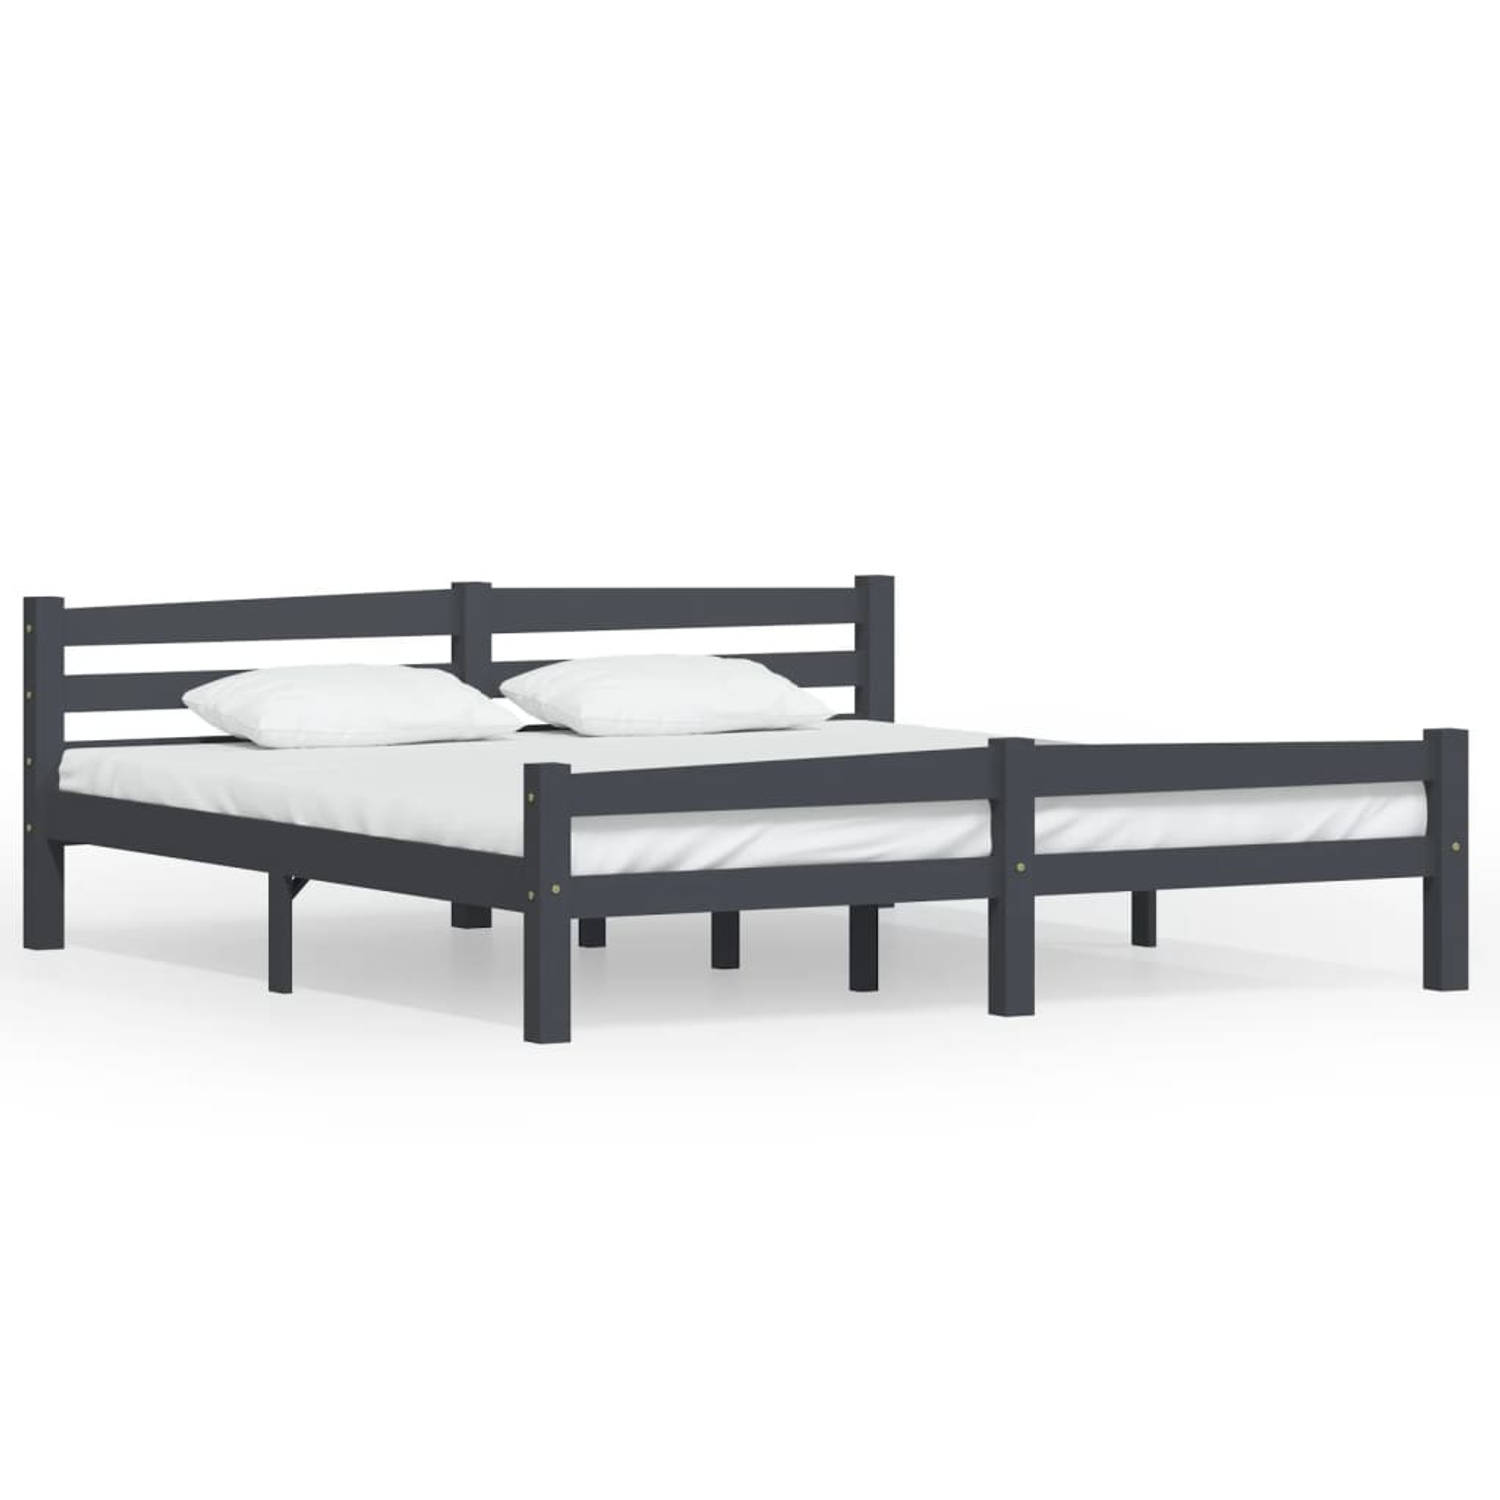 The Living Store Bedframe massief grenenhout donkergrijs 180x200 cm - Bedframe - Bedframe - Bed Frame - Bed Frames - Bed - Bedden - 2-persoonsbed - 2-persoonsbedden - Tweepersoons